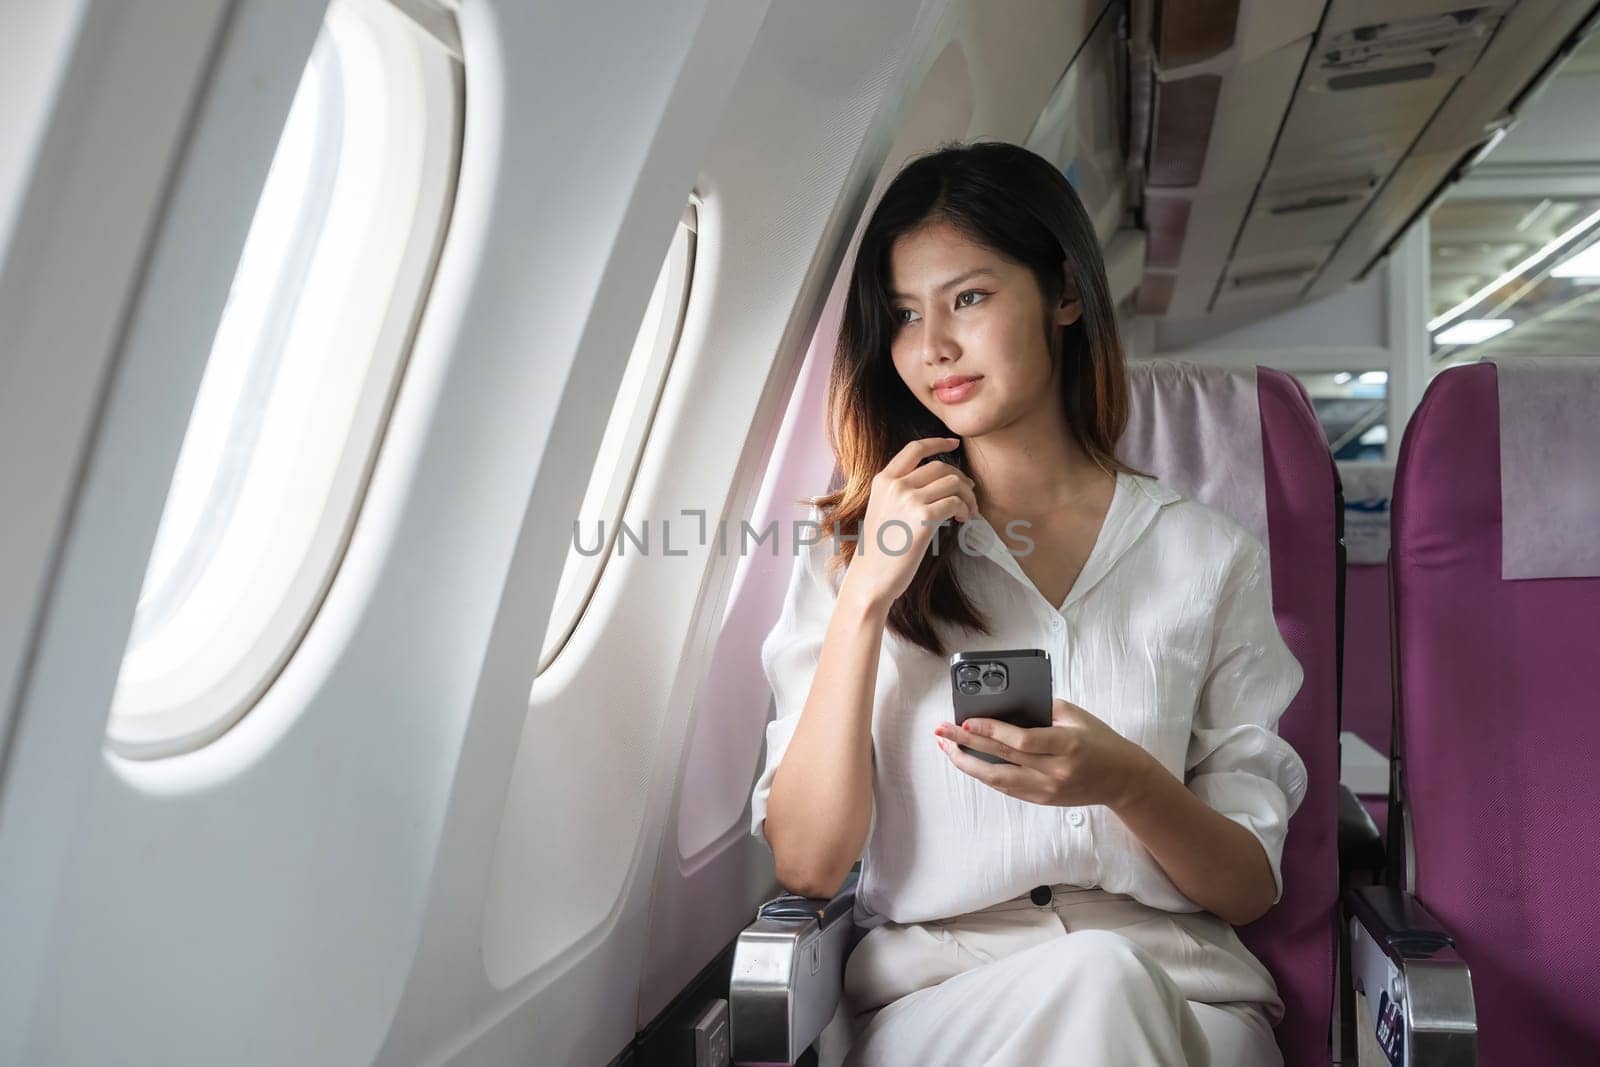 Young woman traveling on airplane and using smartphone. Concept of travel and technology.